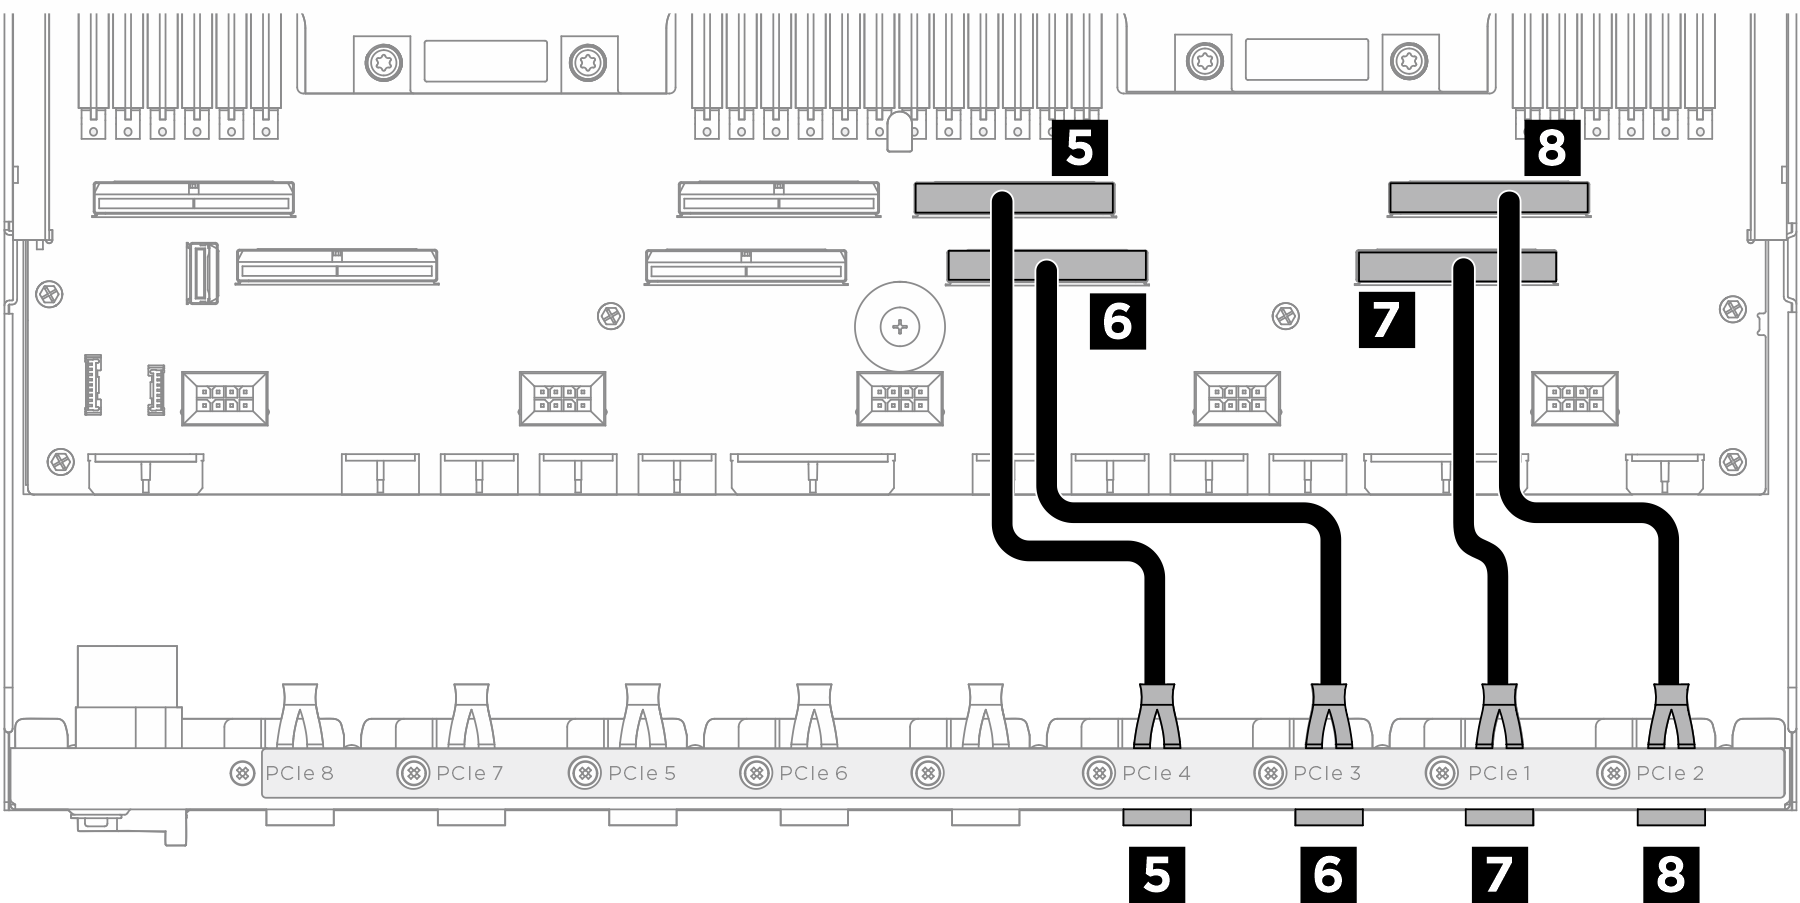 PCIe switch board cable routing (signal cables)